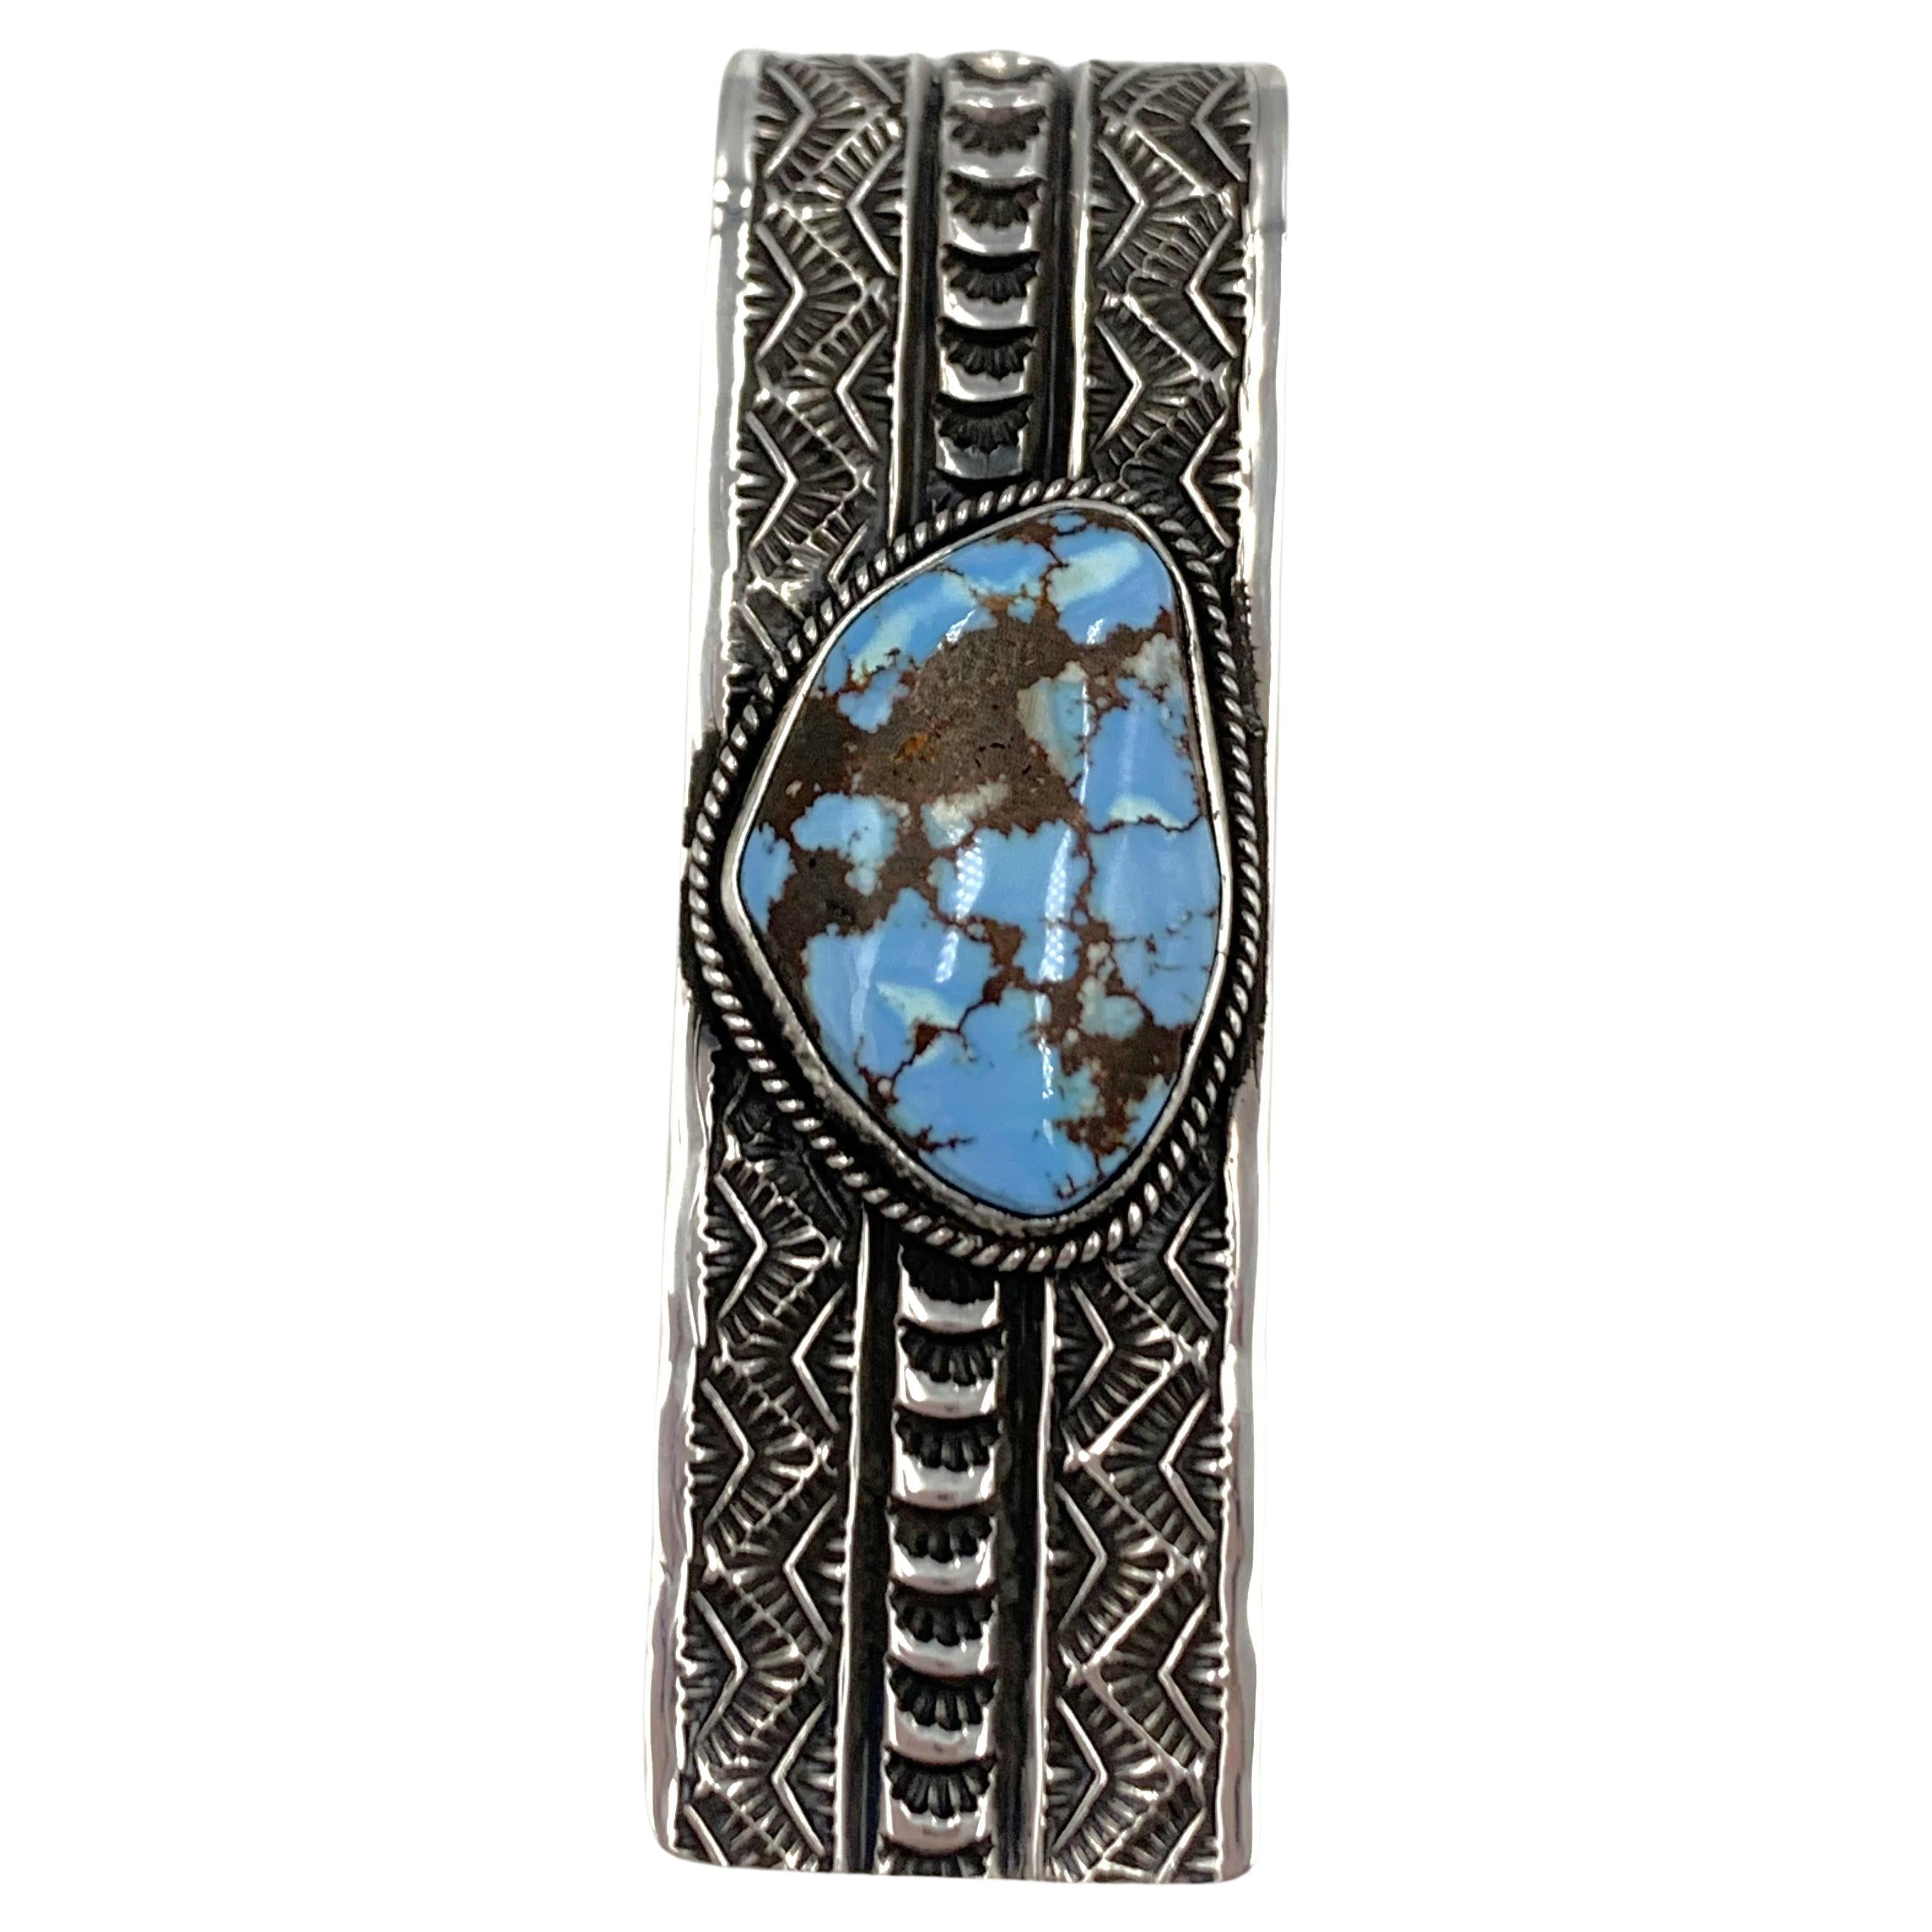 Golden Hills Turquoise Money Clip by Navajo Silversmith Sunshine Reeves

Daniel “Sunshine” Reeves was born in 1966 into a family of silversmiths.  His older brothers, Gary and David (both deceased) taught him the art of working in silver, with which